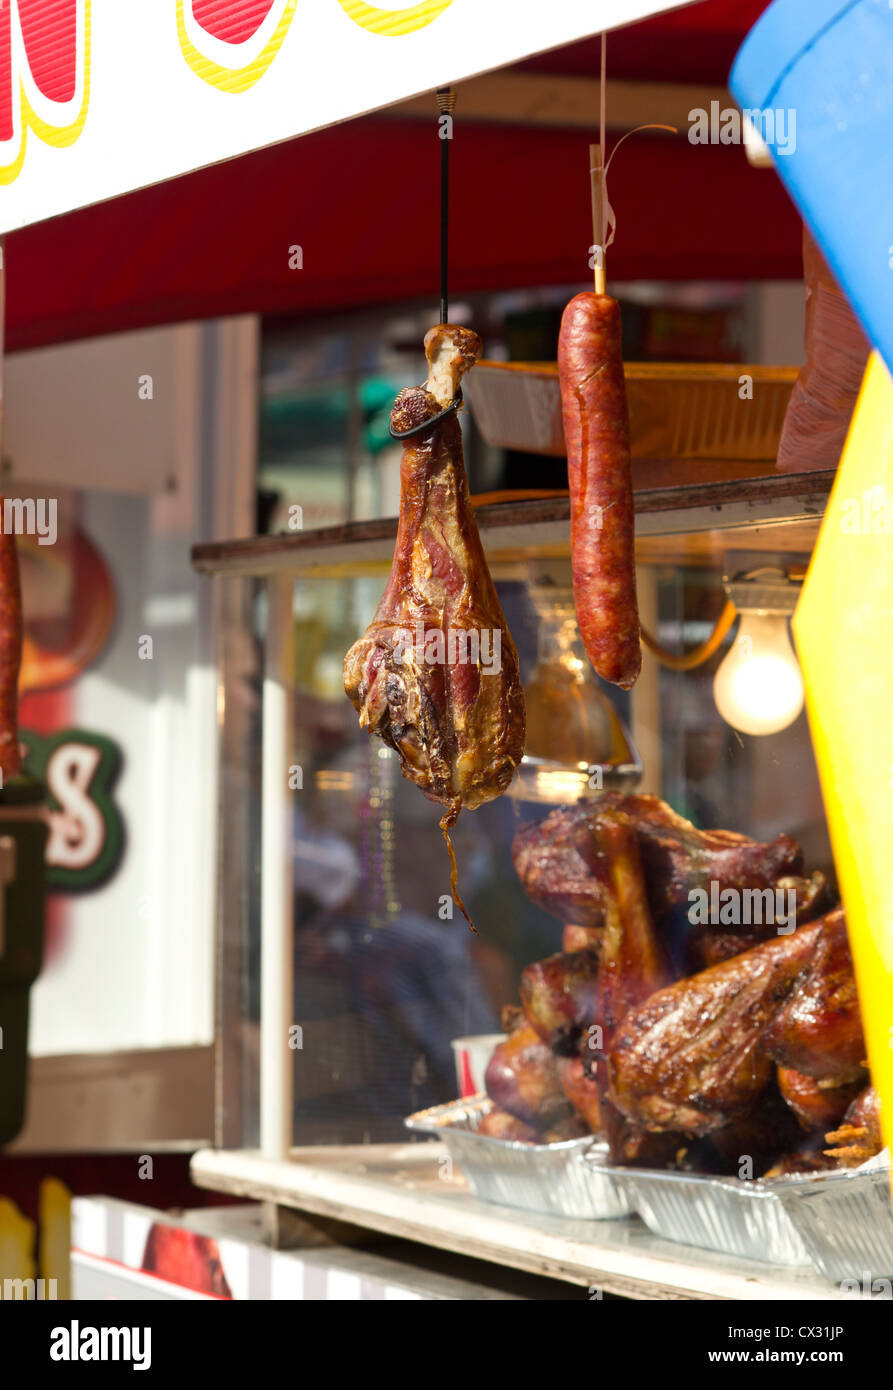 BBQ meats hanging at festival Stock Photo